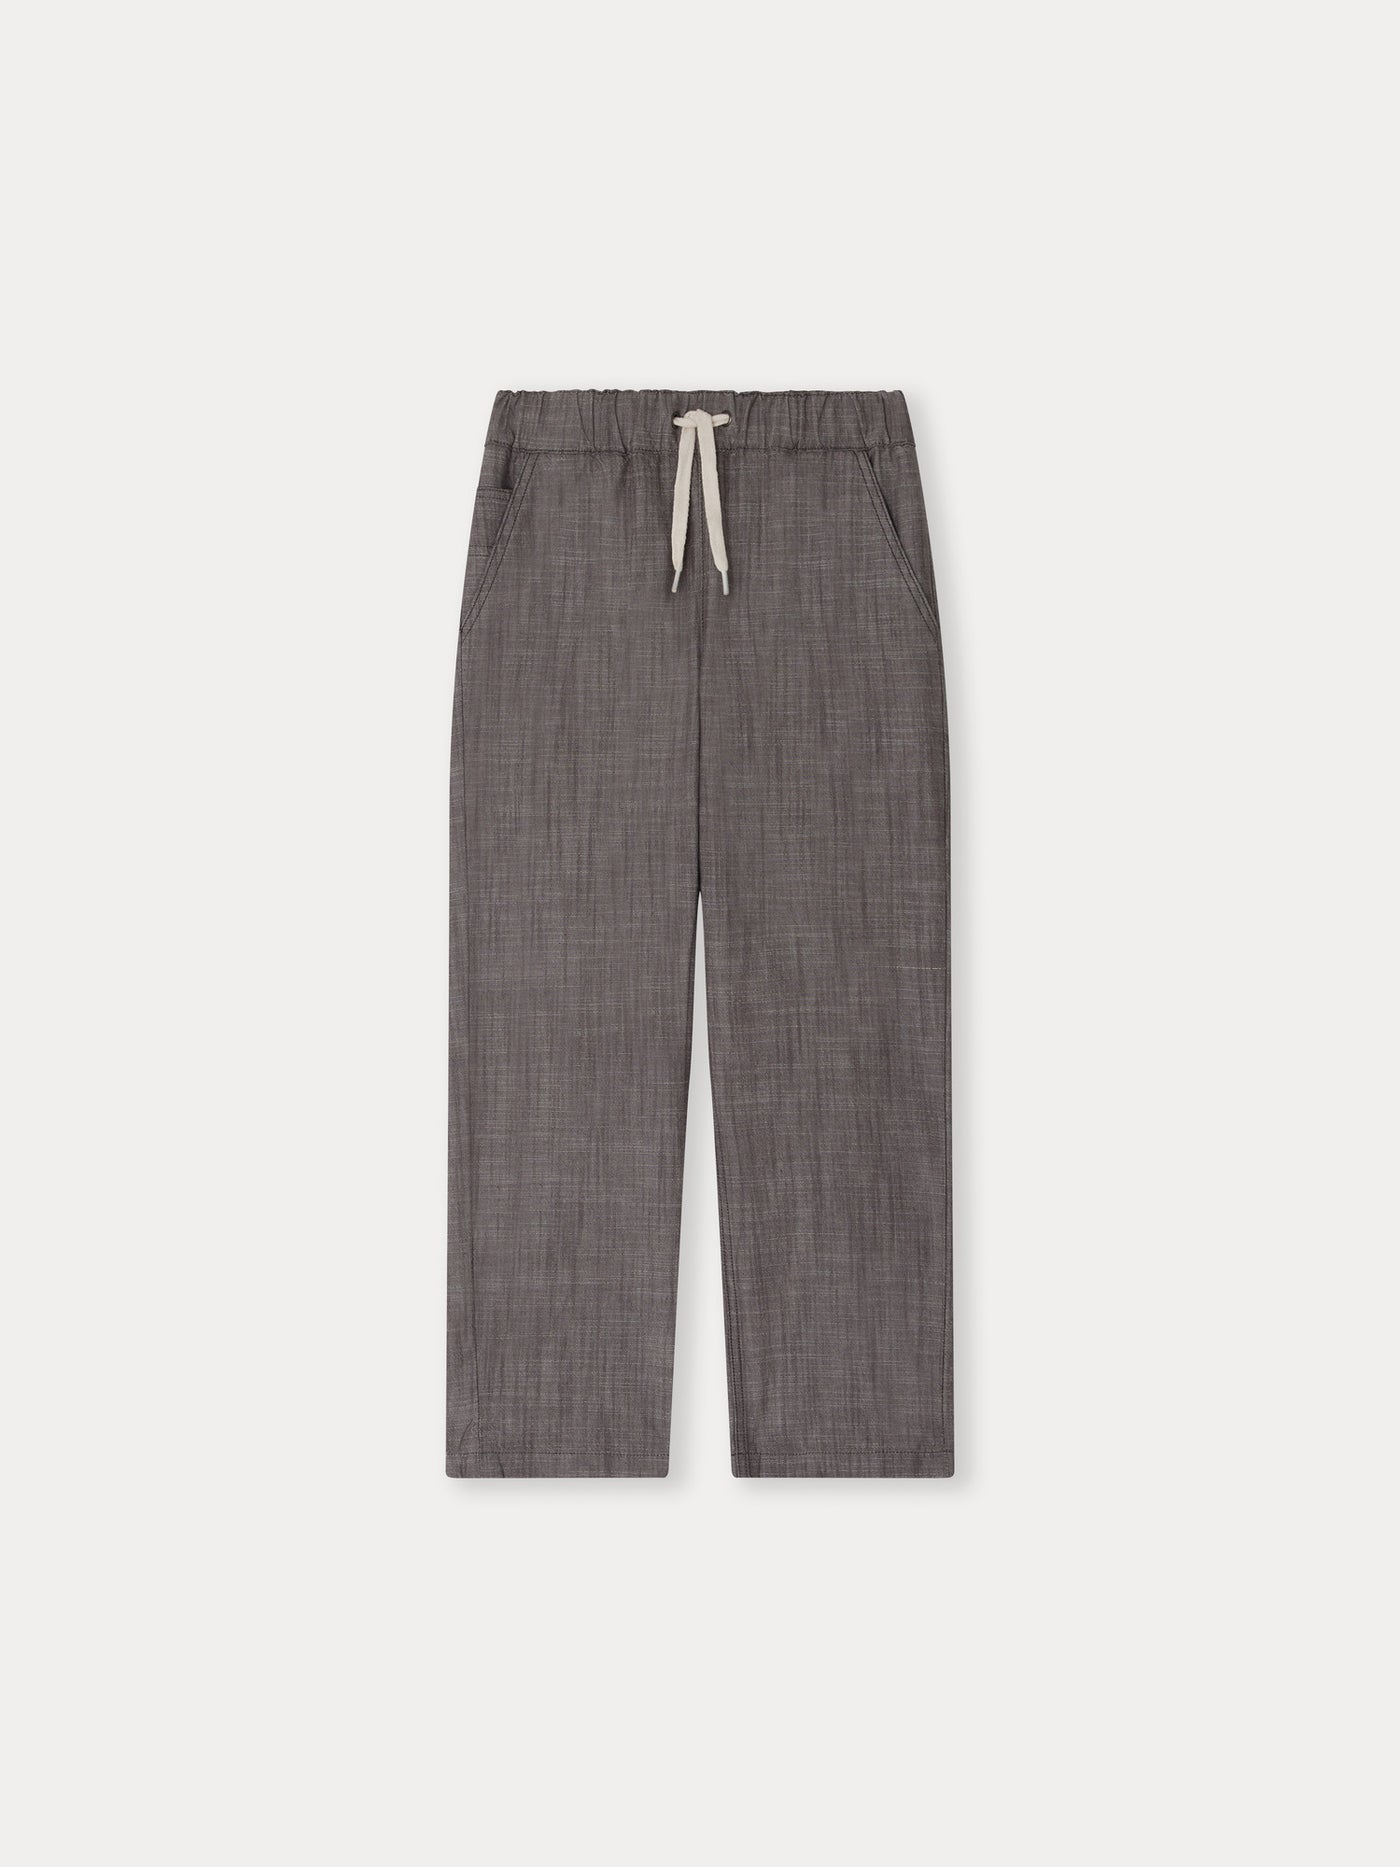 Connell Pants slate gray